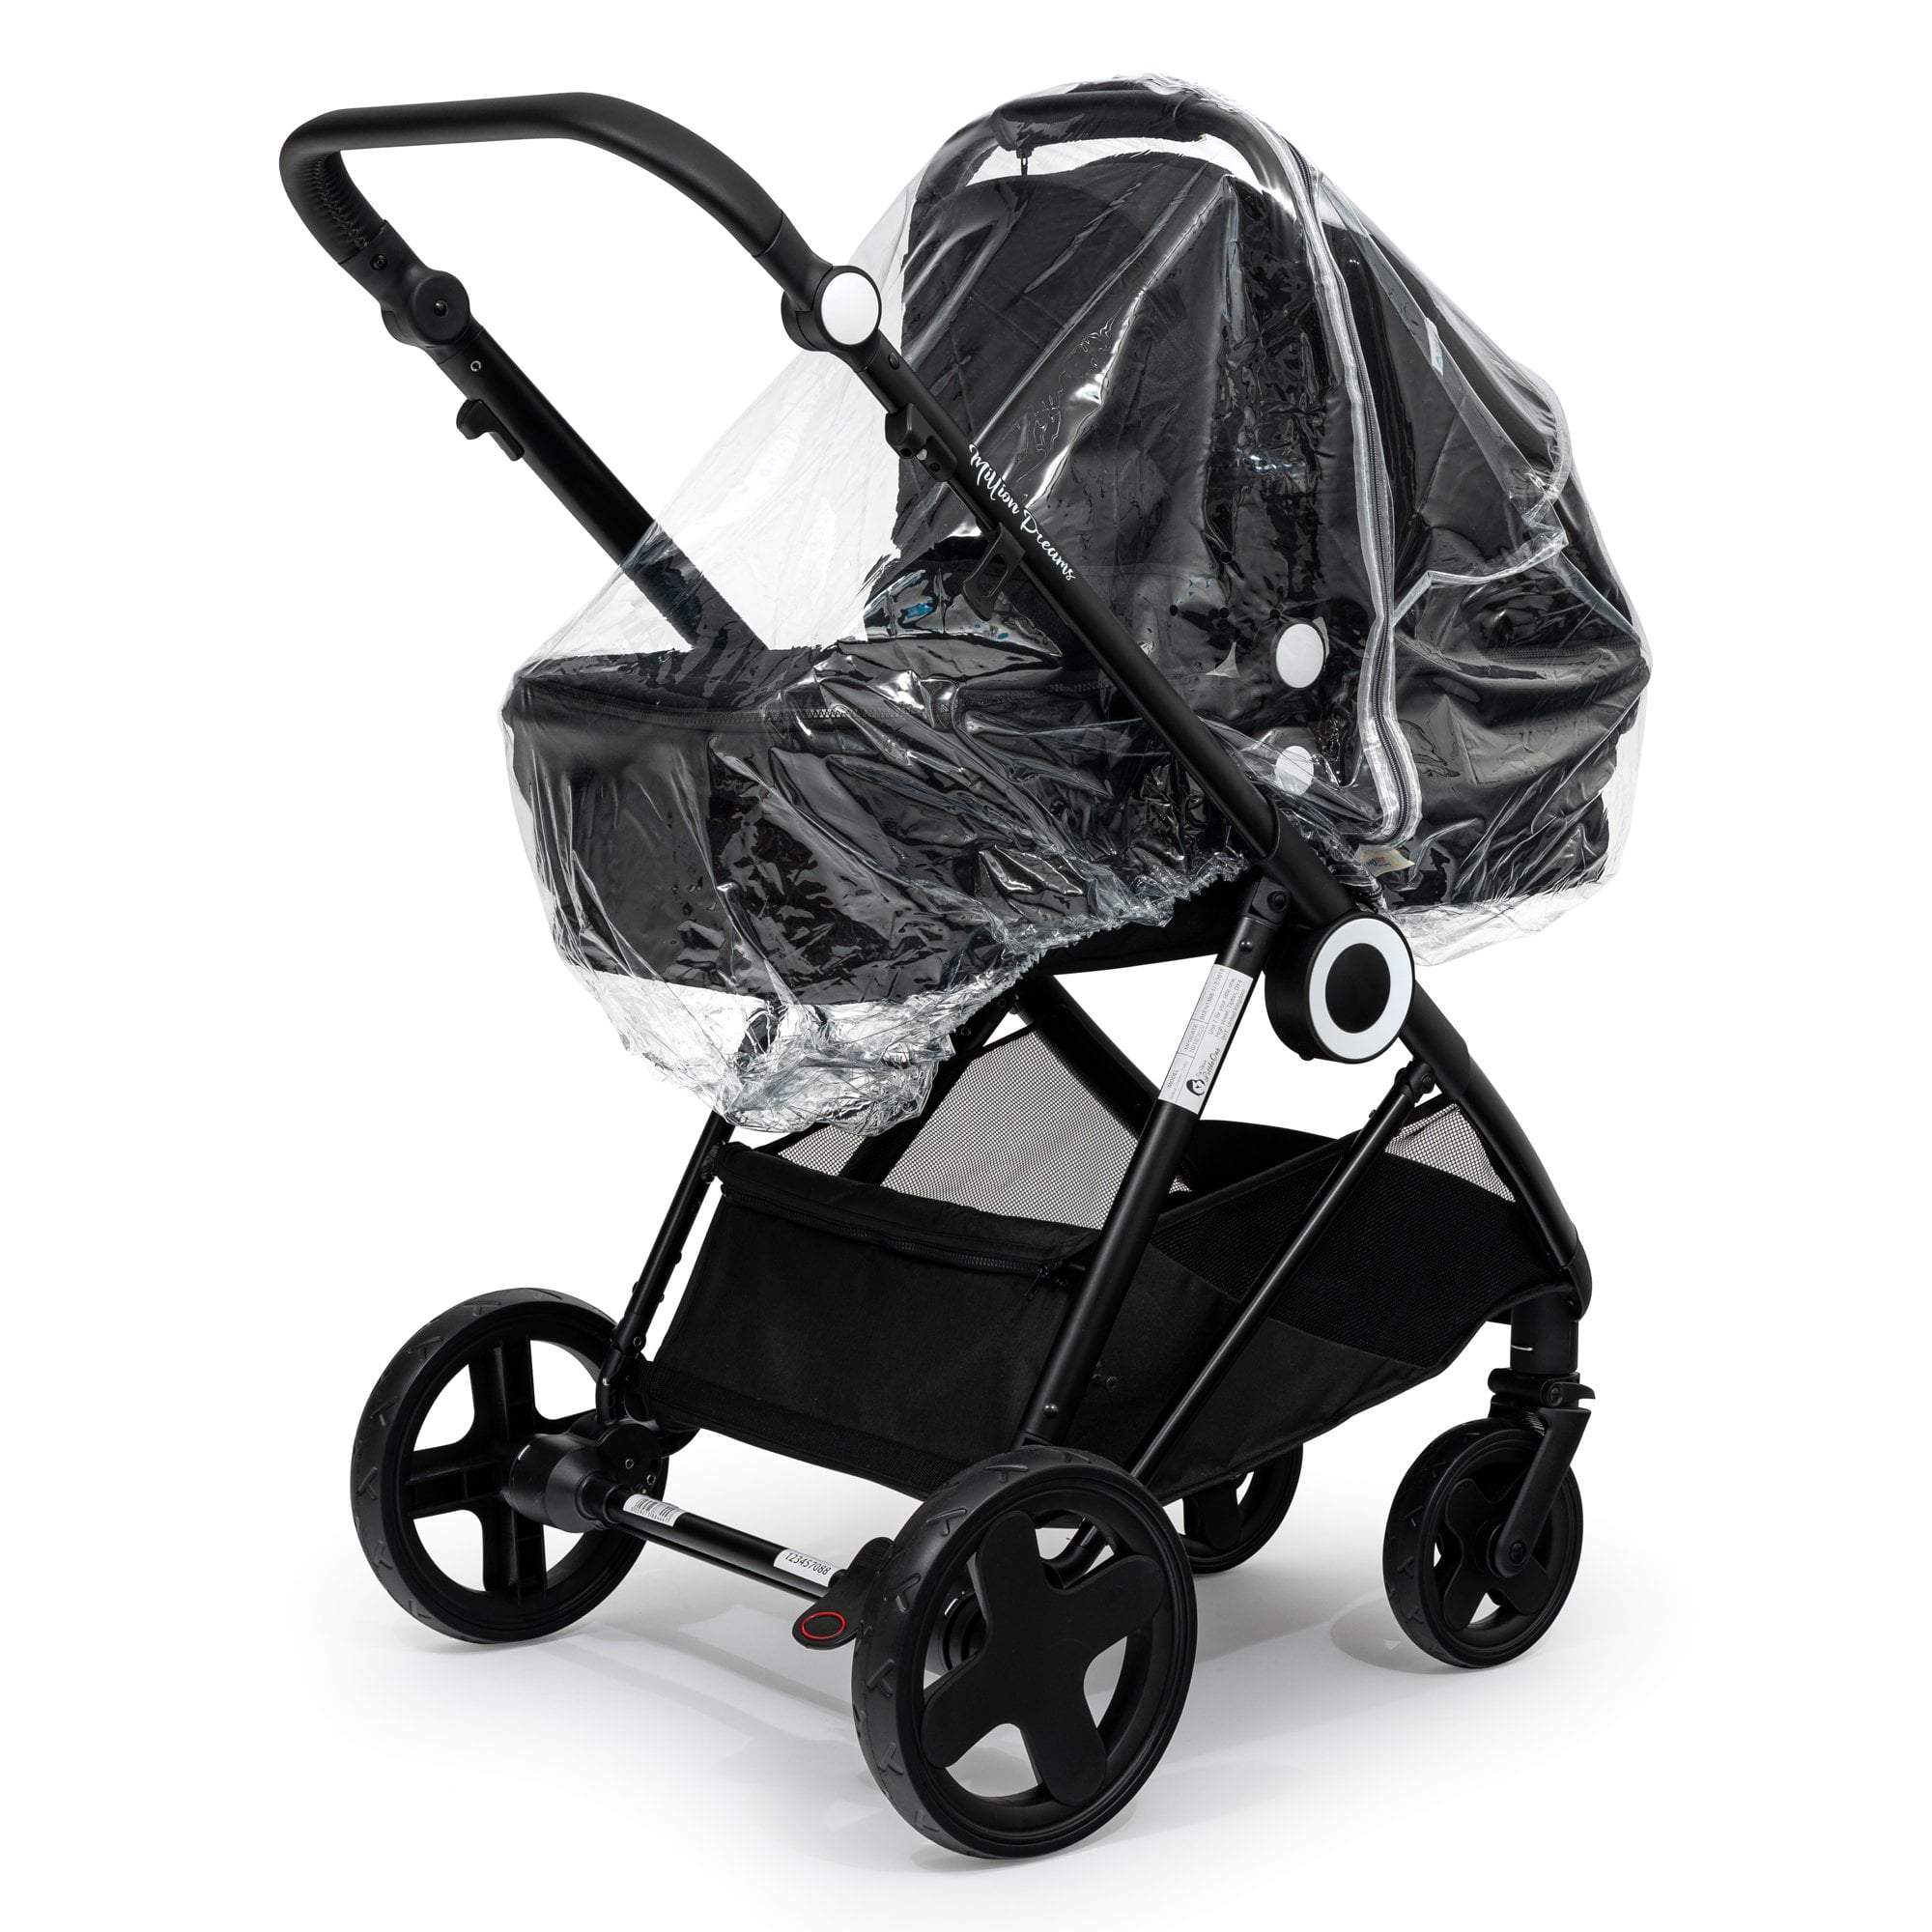 Carrycot Raincover Compatible With Teutonia - Fits All Models - For Your Little One